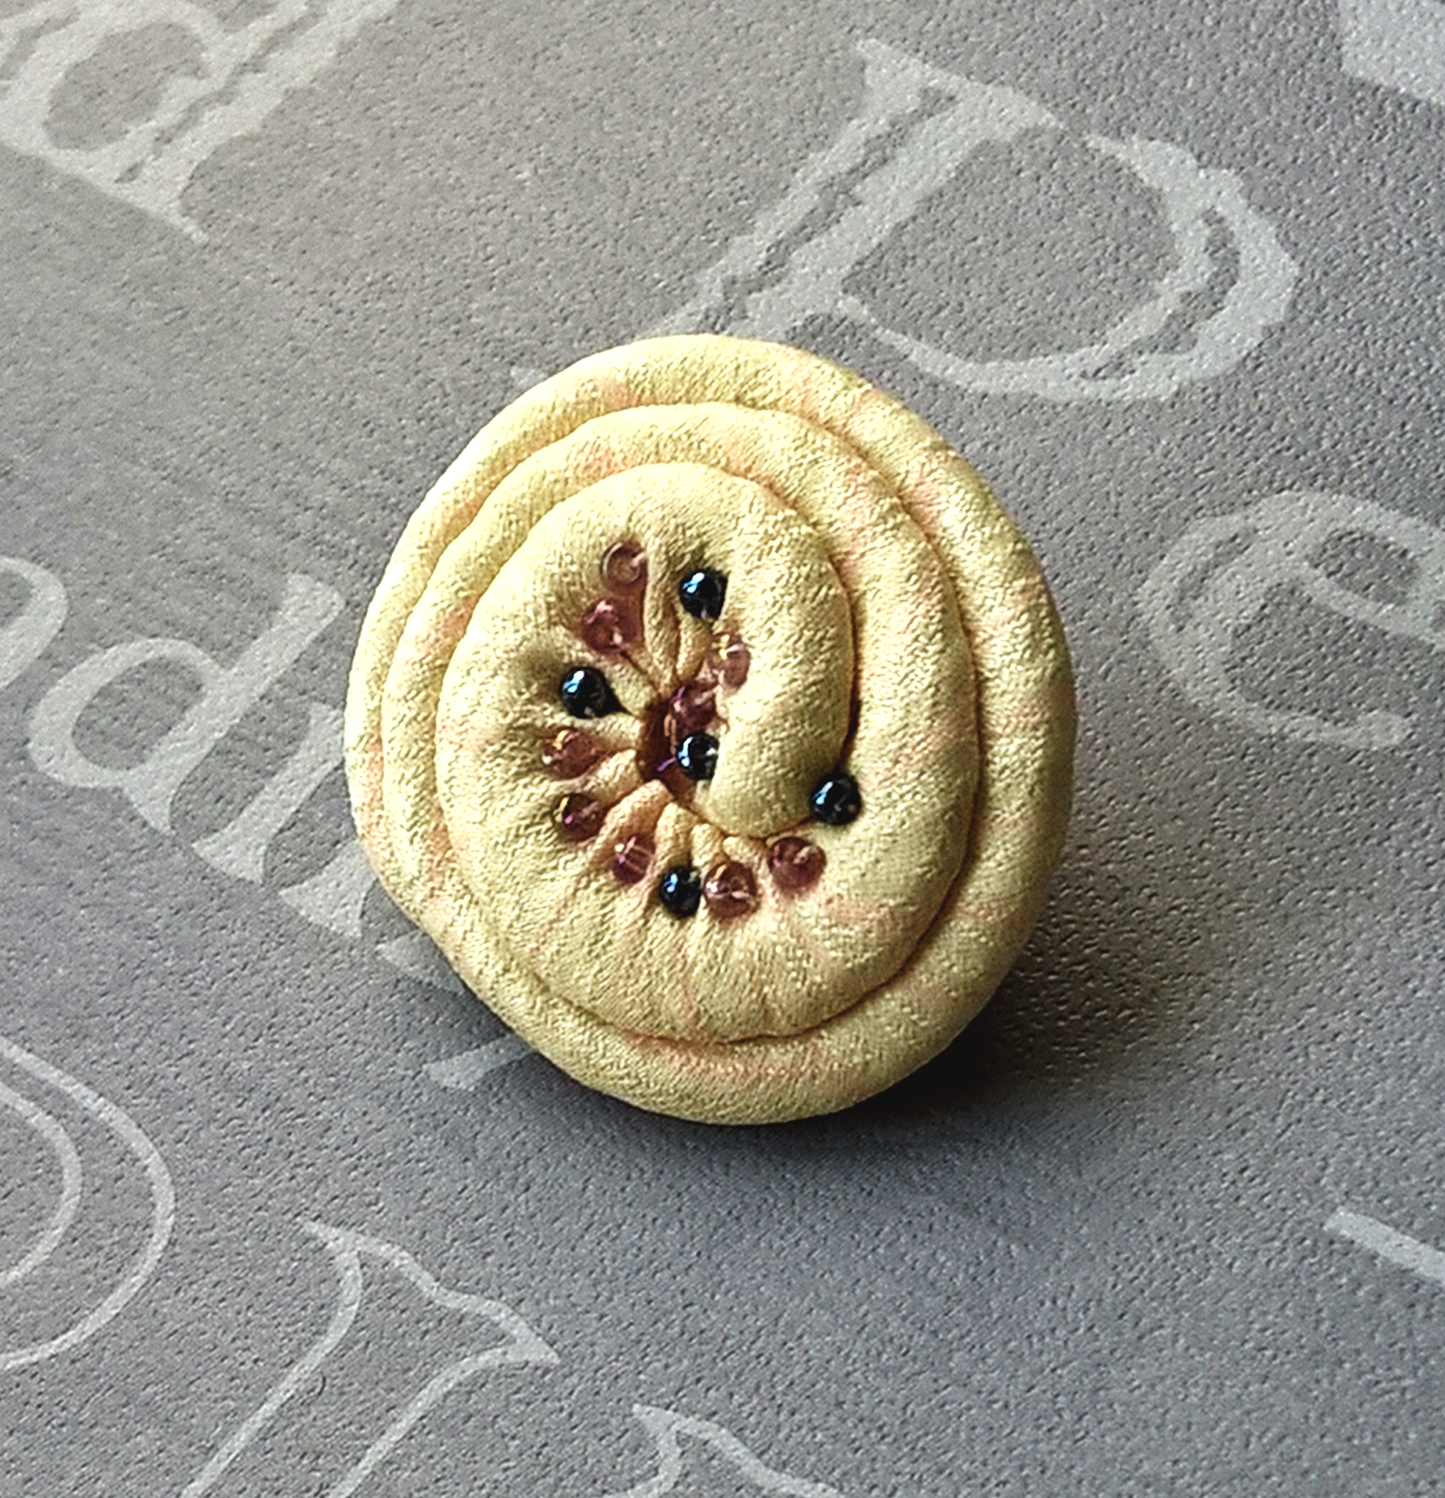 Lemon Japanese silk lapel pin in a shell design with beading